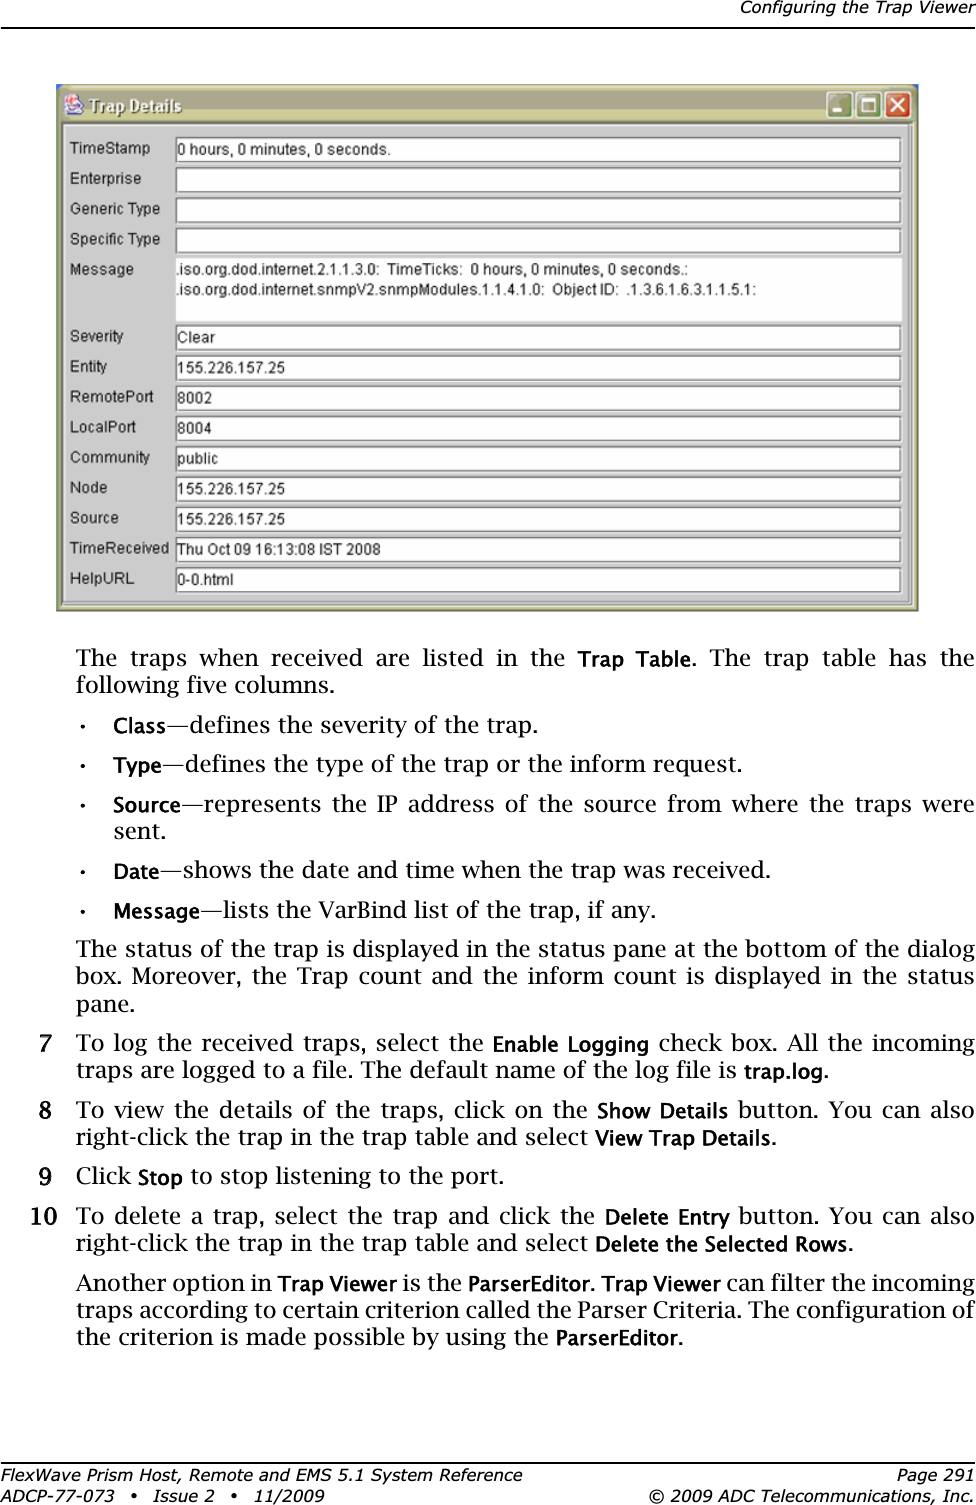 Configuring the Trap ViewerFlexWave Prism Host, Remote and EMS 5.1 System Reference Page 291ADCP-77-073 • Issue 2 • 11/2009 © 2009 ADC Telecommunications, Inc.The traps when received are listed in the Trap  Table. The trap table has the following five columns.•Class—defines the severity of the trap.•Type—defines the type of the trap or the inform request.•Source—represents the IP address of the source from where the traps were sent.•Date—shows the date and time when the trap was received.•Message—lists the VarBind list of the trap, if any.The status of the trap is displayed in the status pane at the bottom of the dialog box. Moreover, the Trap count and the inform count is displayed in the status pane.77 To log the received traps, select the Enable Logging check box. All the incoming traps are logged to a file. The default name of the log file is trap.log.88 To view the details of the traps, click on the Show Details button. You can also right-click the trap in the trap table and select View Trap Details.99 Click Stop to stop listening to the port. 100 To delete a trap, select the trap and click the Delete Entry button. You can also right-click the trap in the trap table and select Delete the Selected Rows.Another option in Trap Viewer is the ParserEditor.Trap Viewer can filter the incoming traps according to certain criterion called the Parser Criteria. The configuration of the criterion is made possible by using the ParserEditor.